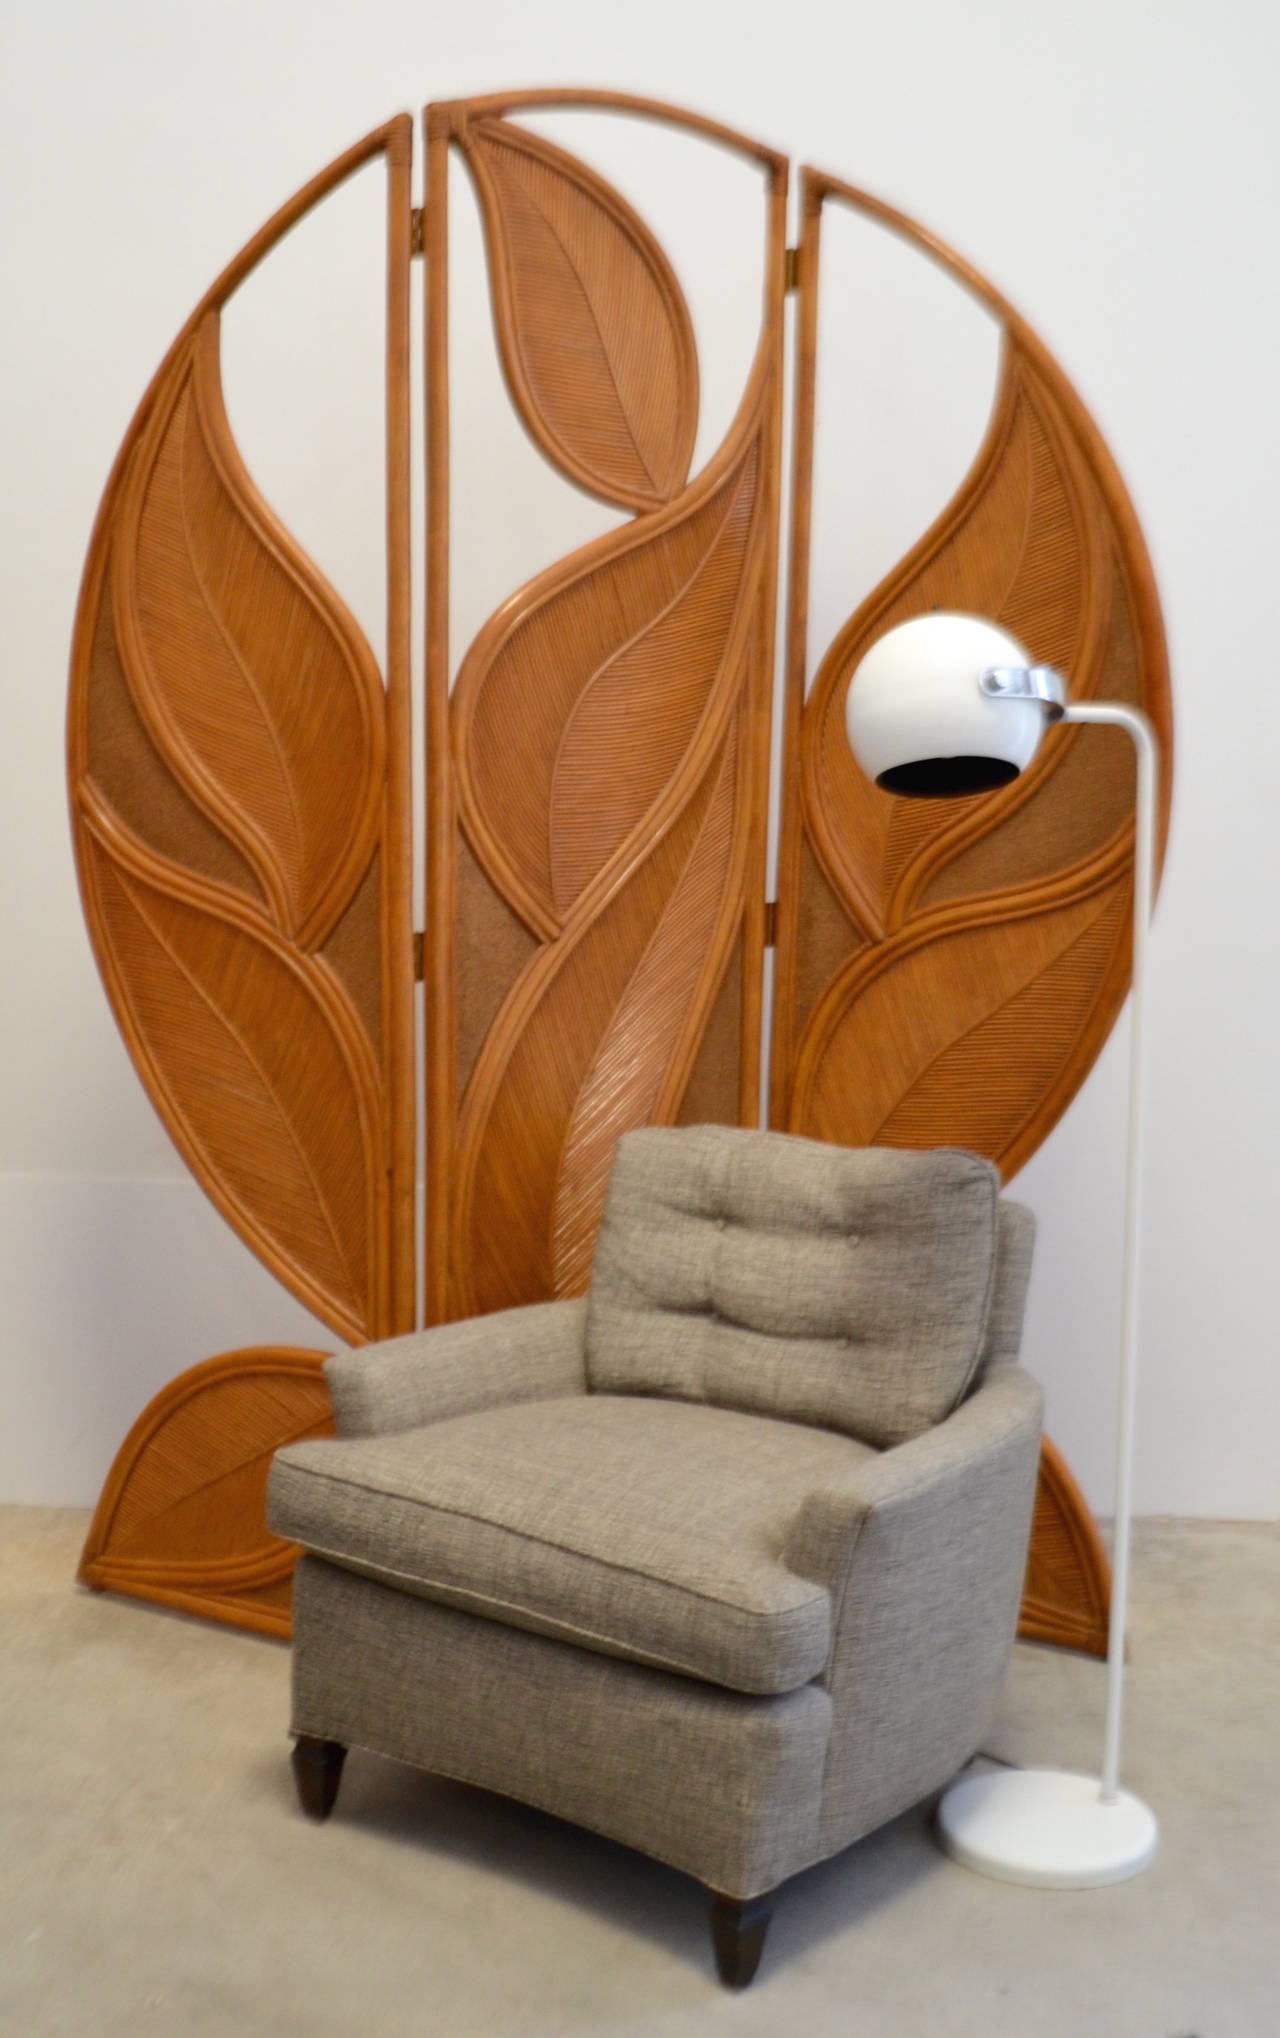 Incredible Art Nouveau inspired three panel folding screen, c. 1950s -1960s. This stunning sculptural room divider is designed of bent rattan, split reed and ground sandstone.  

Measurements:
Overall: 80